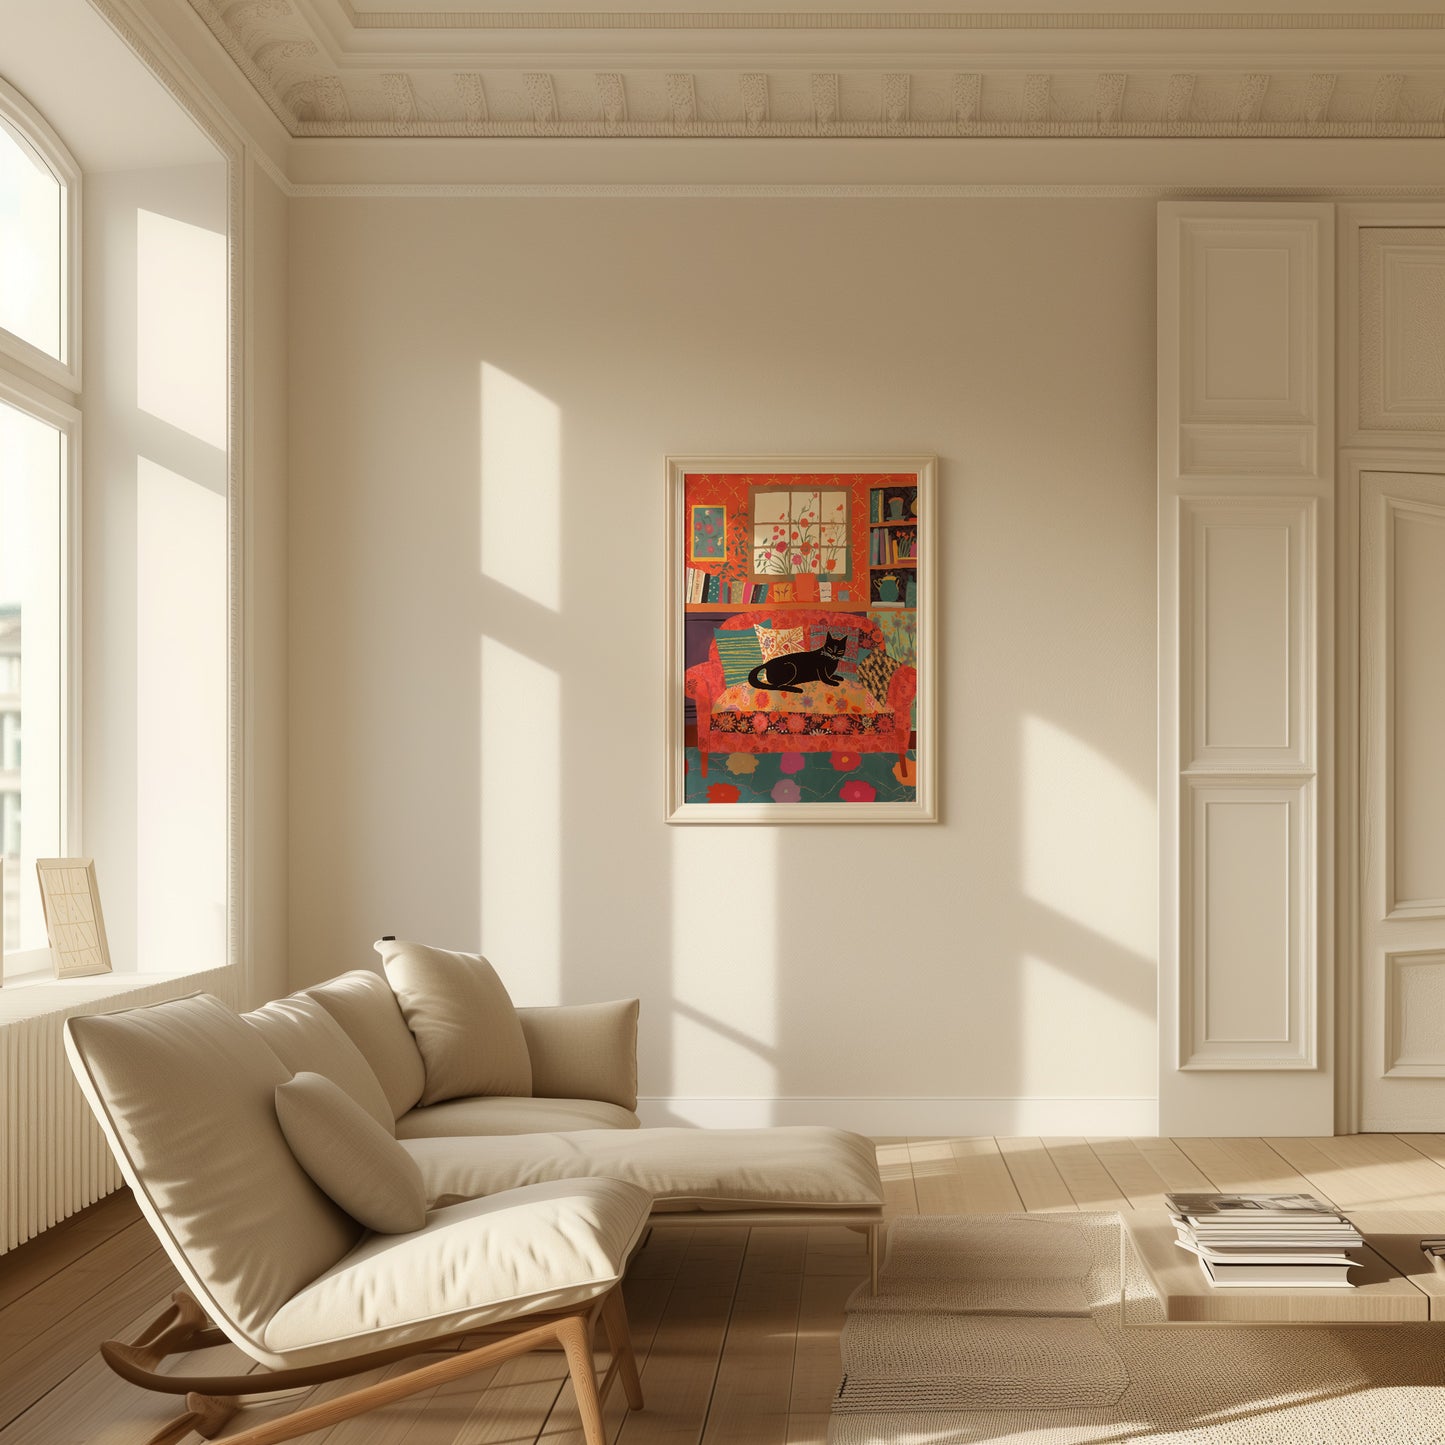 A cozy living room corner with a sofa, artwork on the wall, and sunlight streaming in.